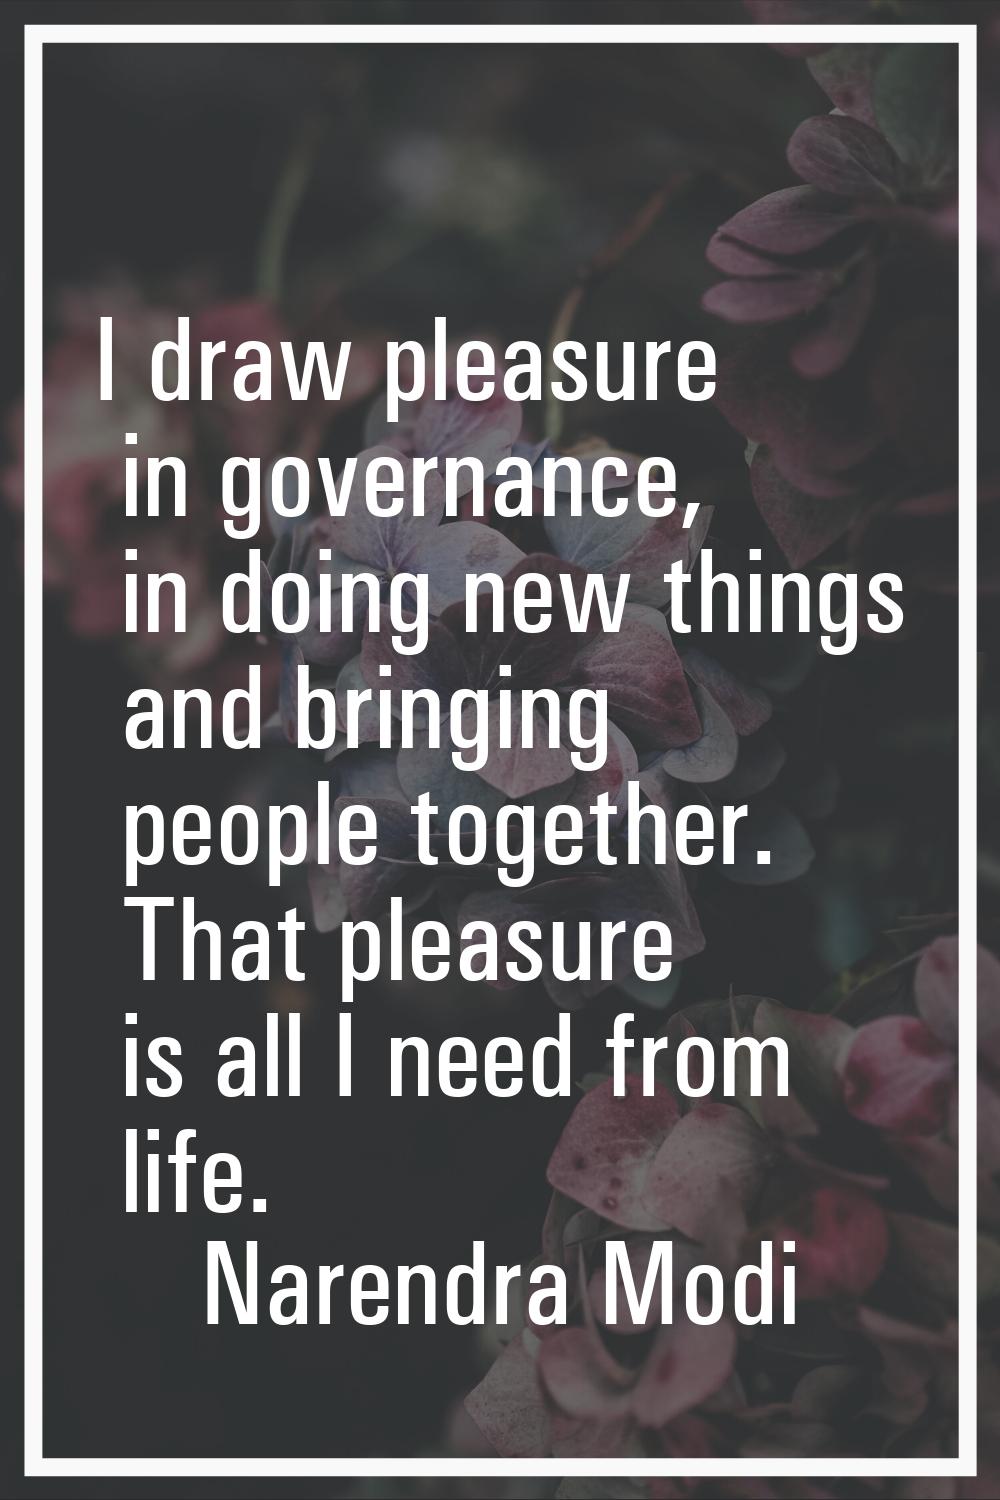 I draw pleasure in governance, in doing new things and bringing people together. That pleasure is a